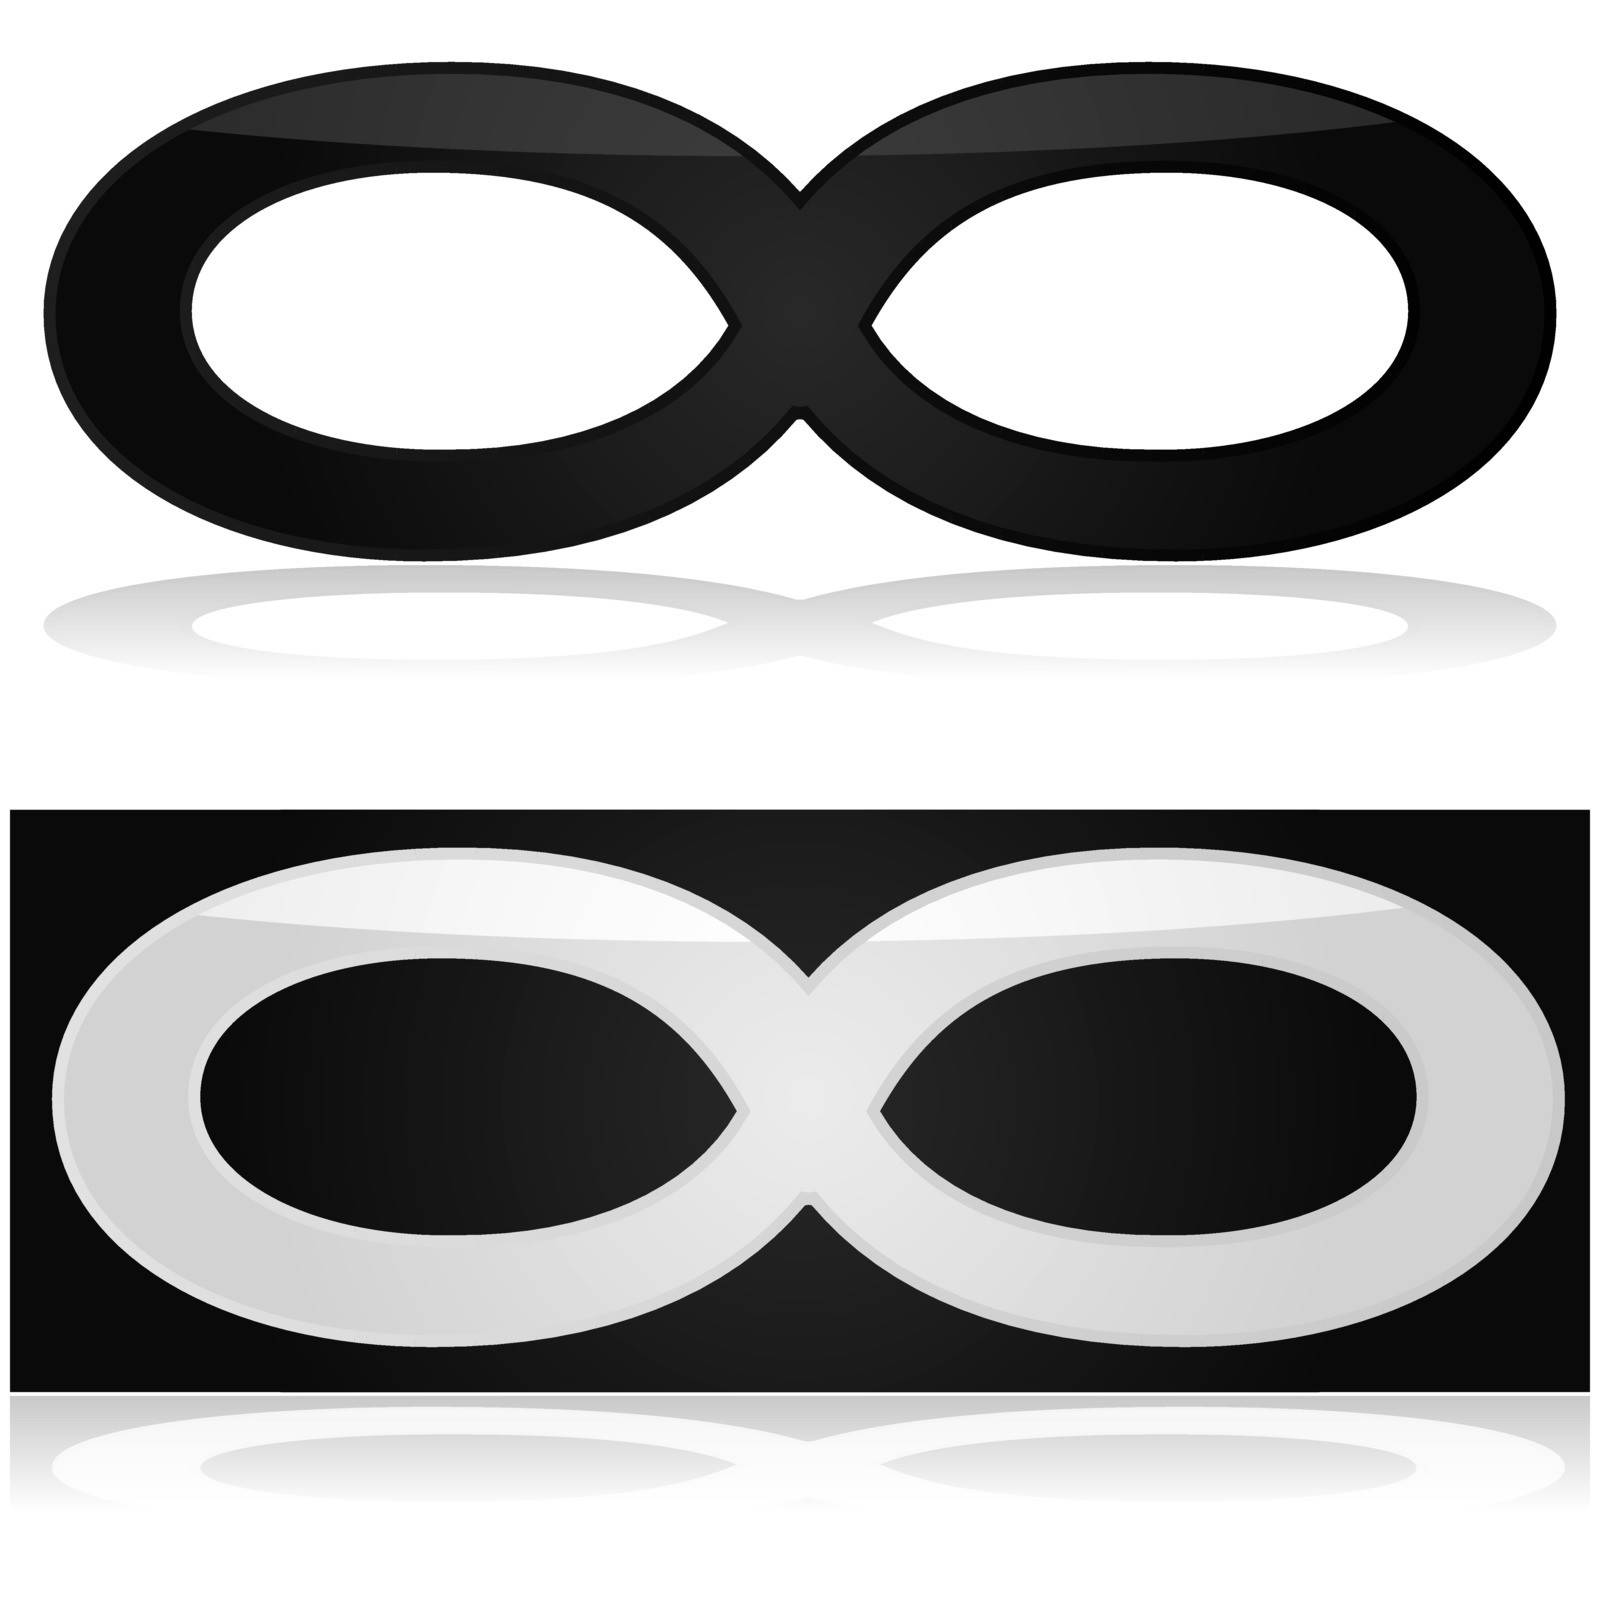 Glossy illustration showing the infinity symbol in black and white